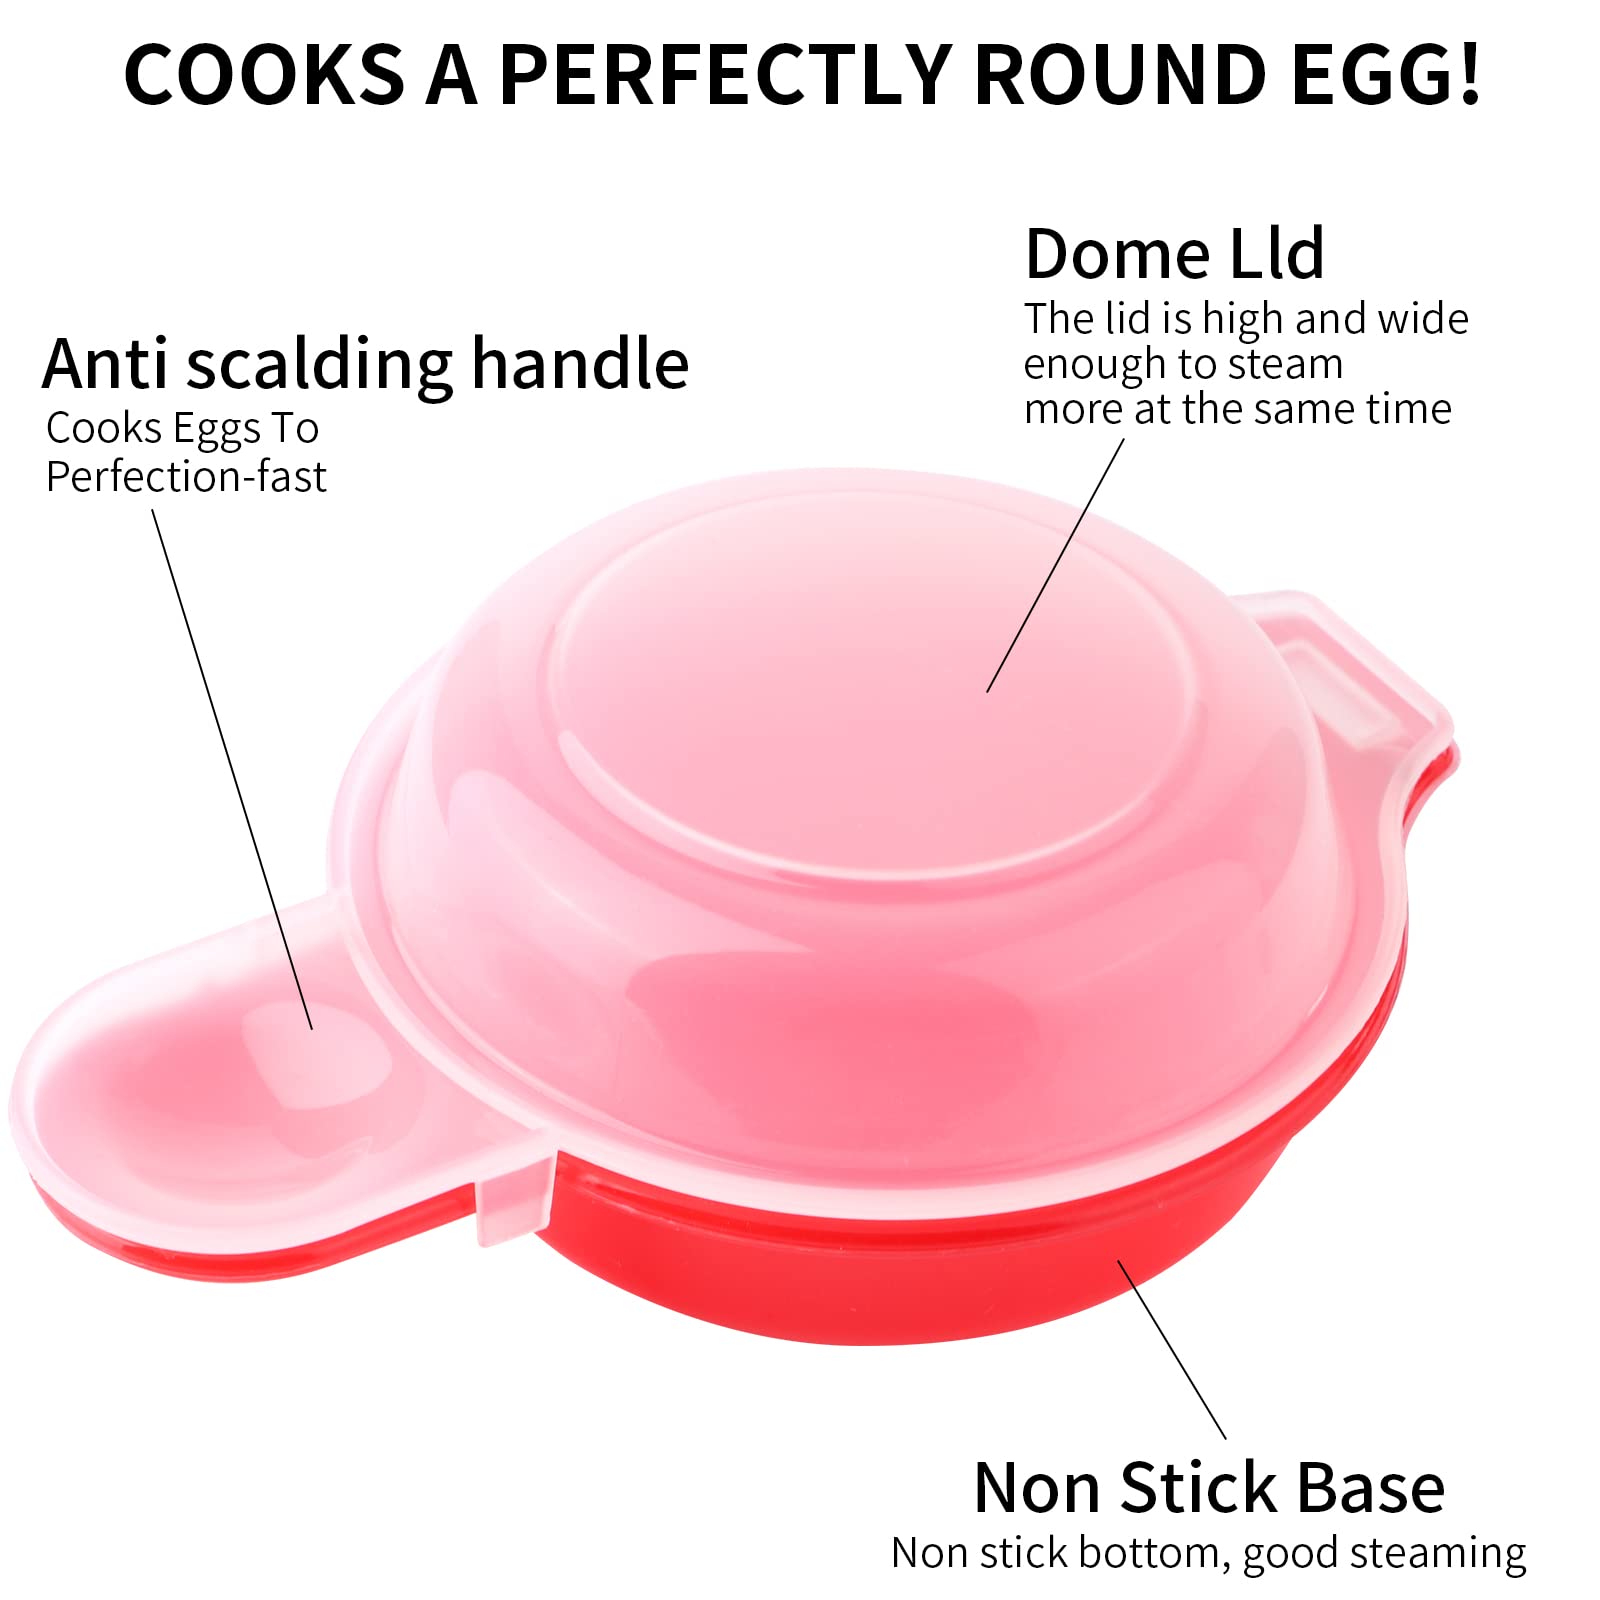 2 sets Microwave Egg Cooker,1 Minute Fast Egg Hamburg Omelet Maker Kitchen Cooking Tool(Red and clear)